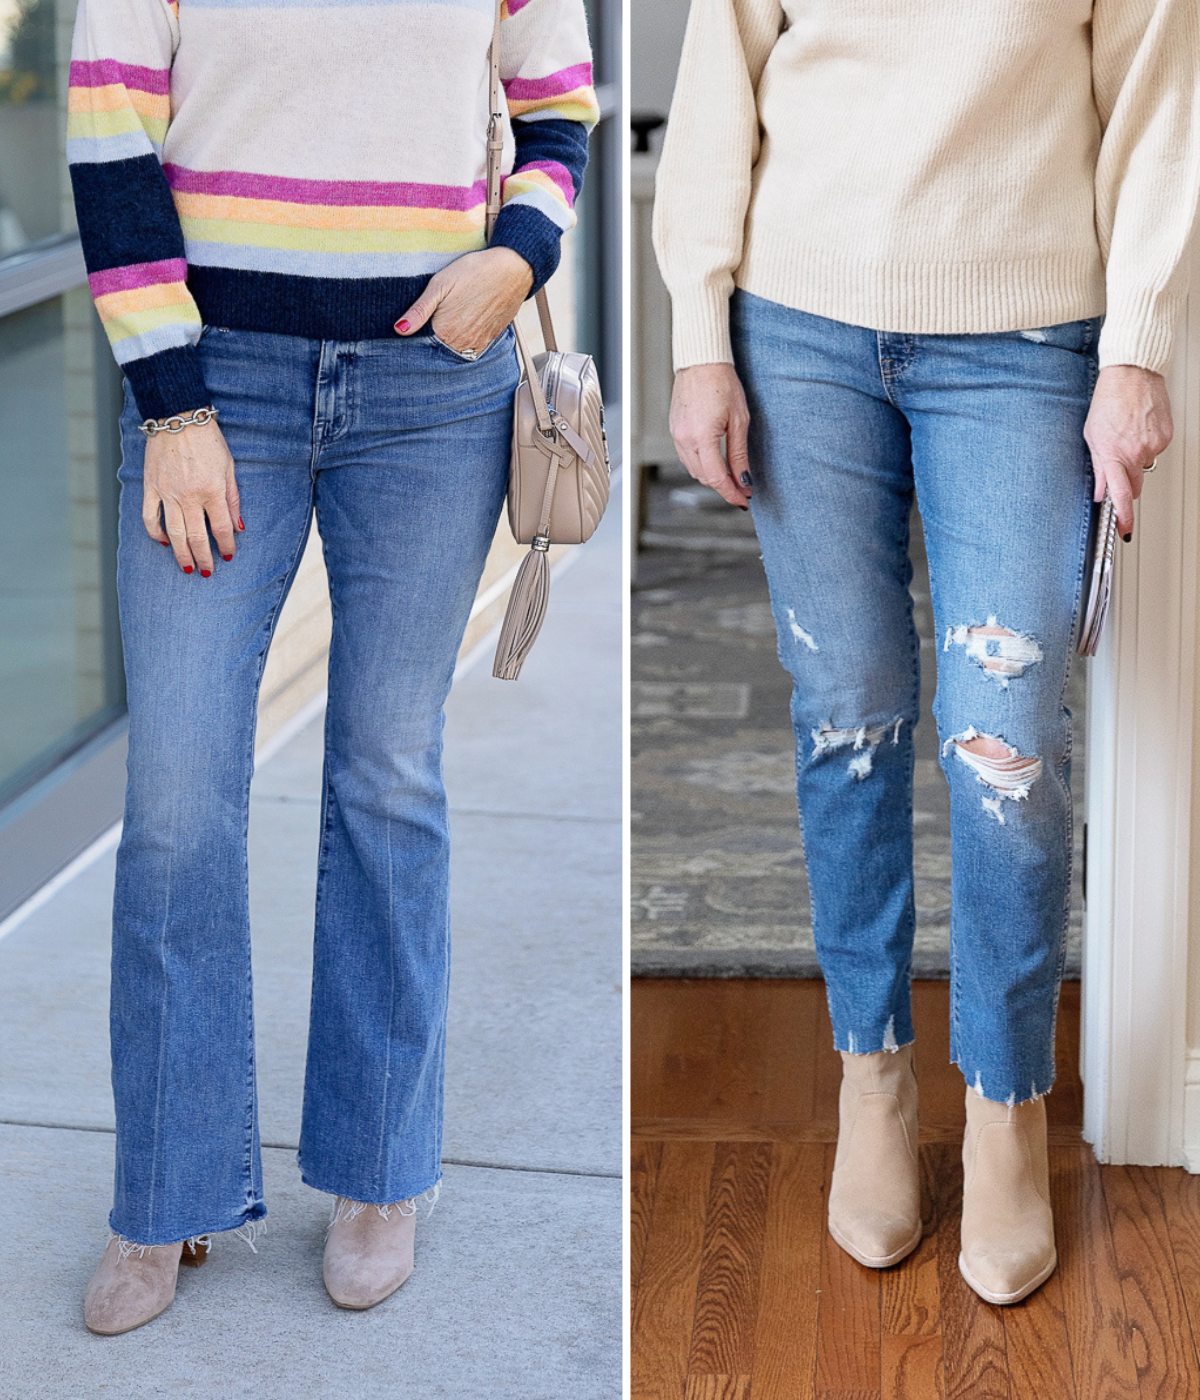 Denim Mistakes Women Make: Wearing too much embellishment or too much distressing/whiskering.